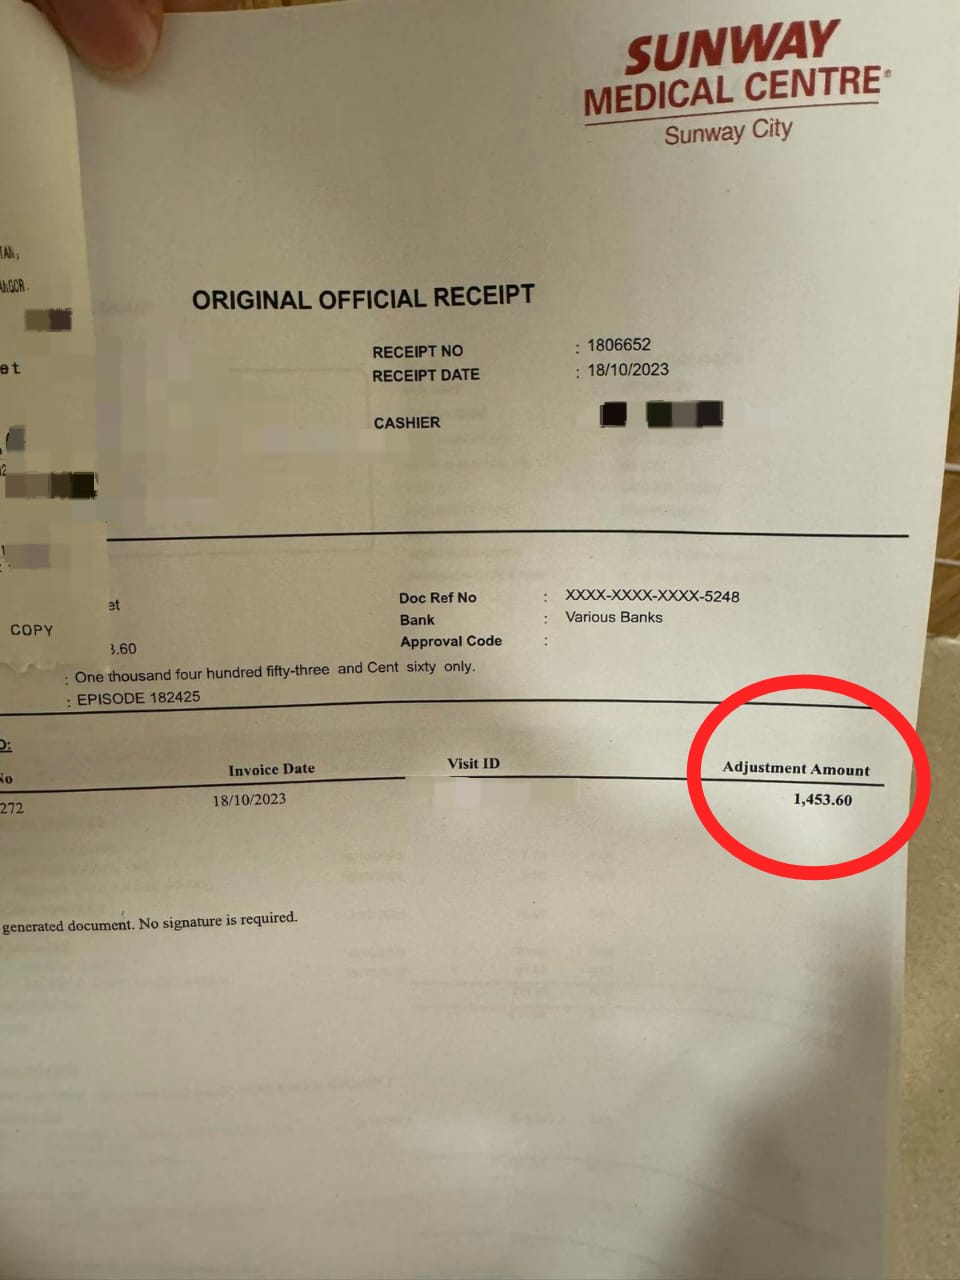 Tan boon heong's medical receipt after taking out the tiny fish bone